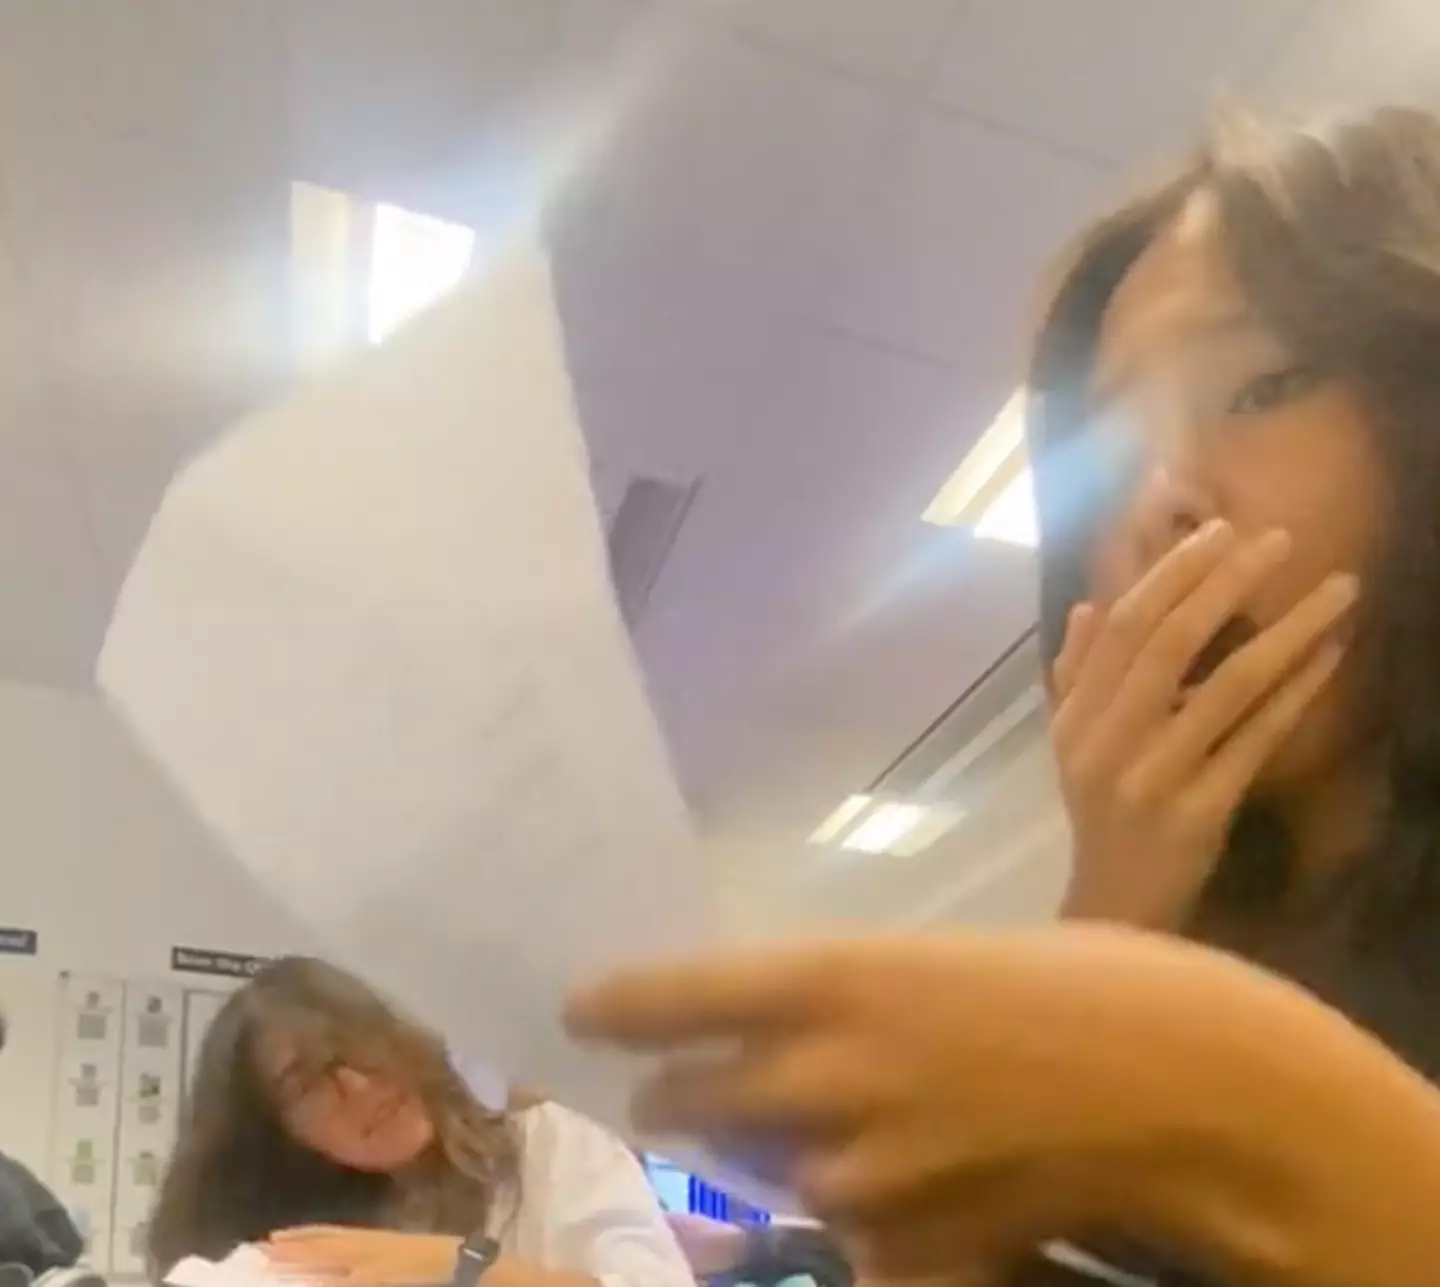 The woman captured her live reaction to her A-Level results and uploaded it to TikTok.